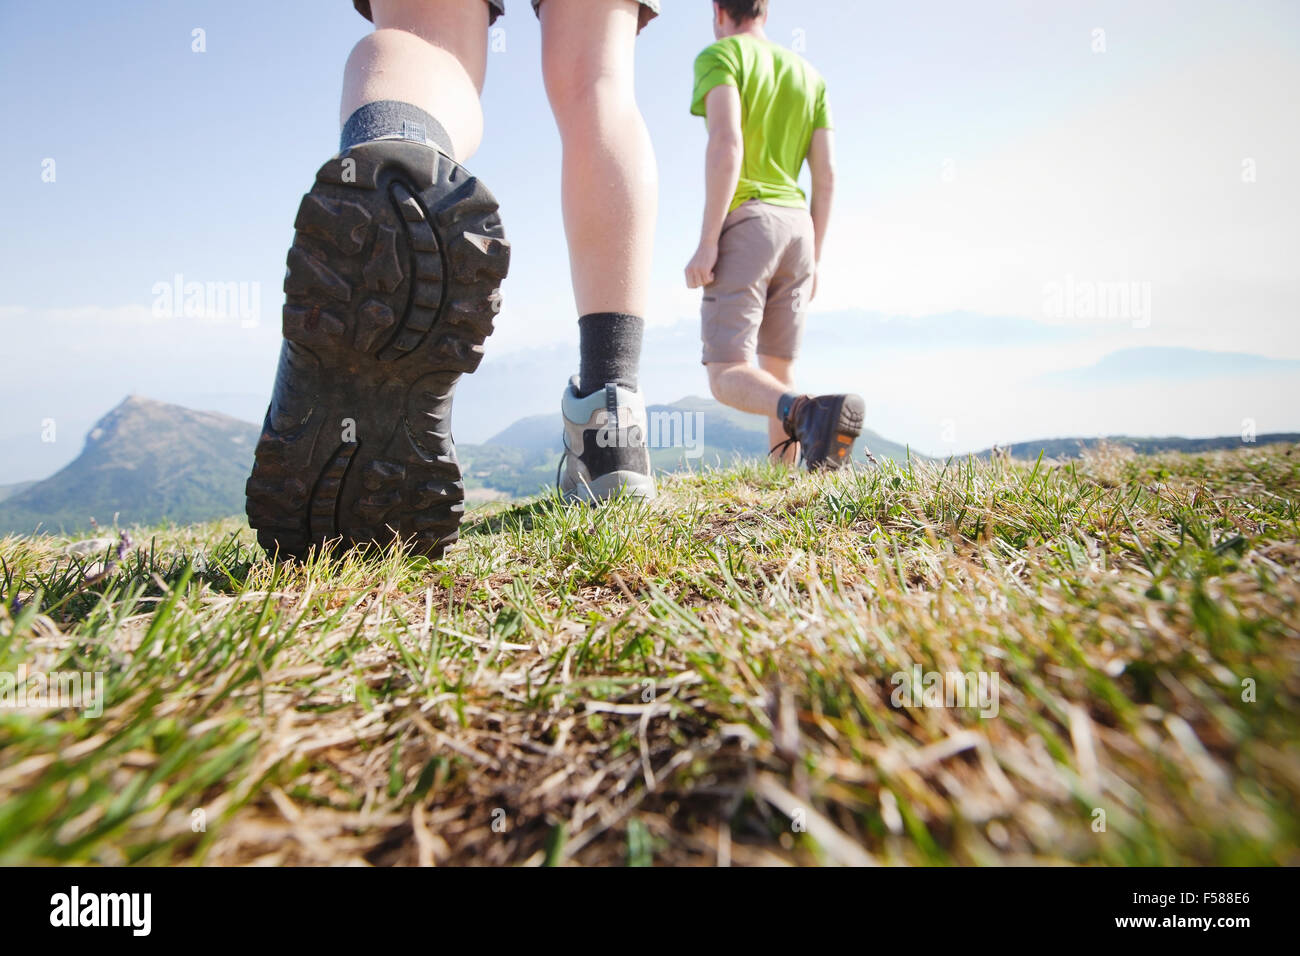 hikers walking in the mountains, close up of the foot, low angle Stock Photo